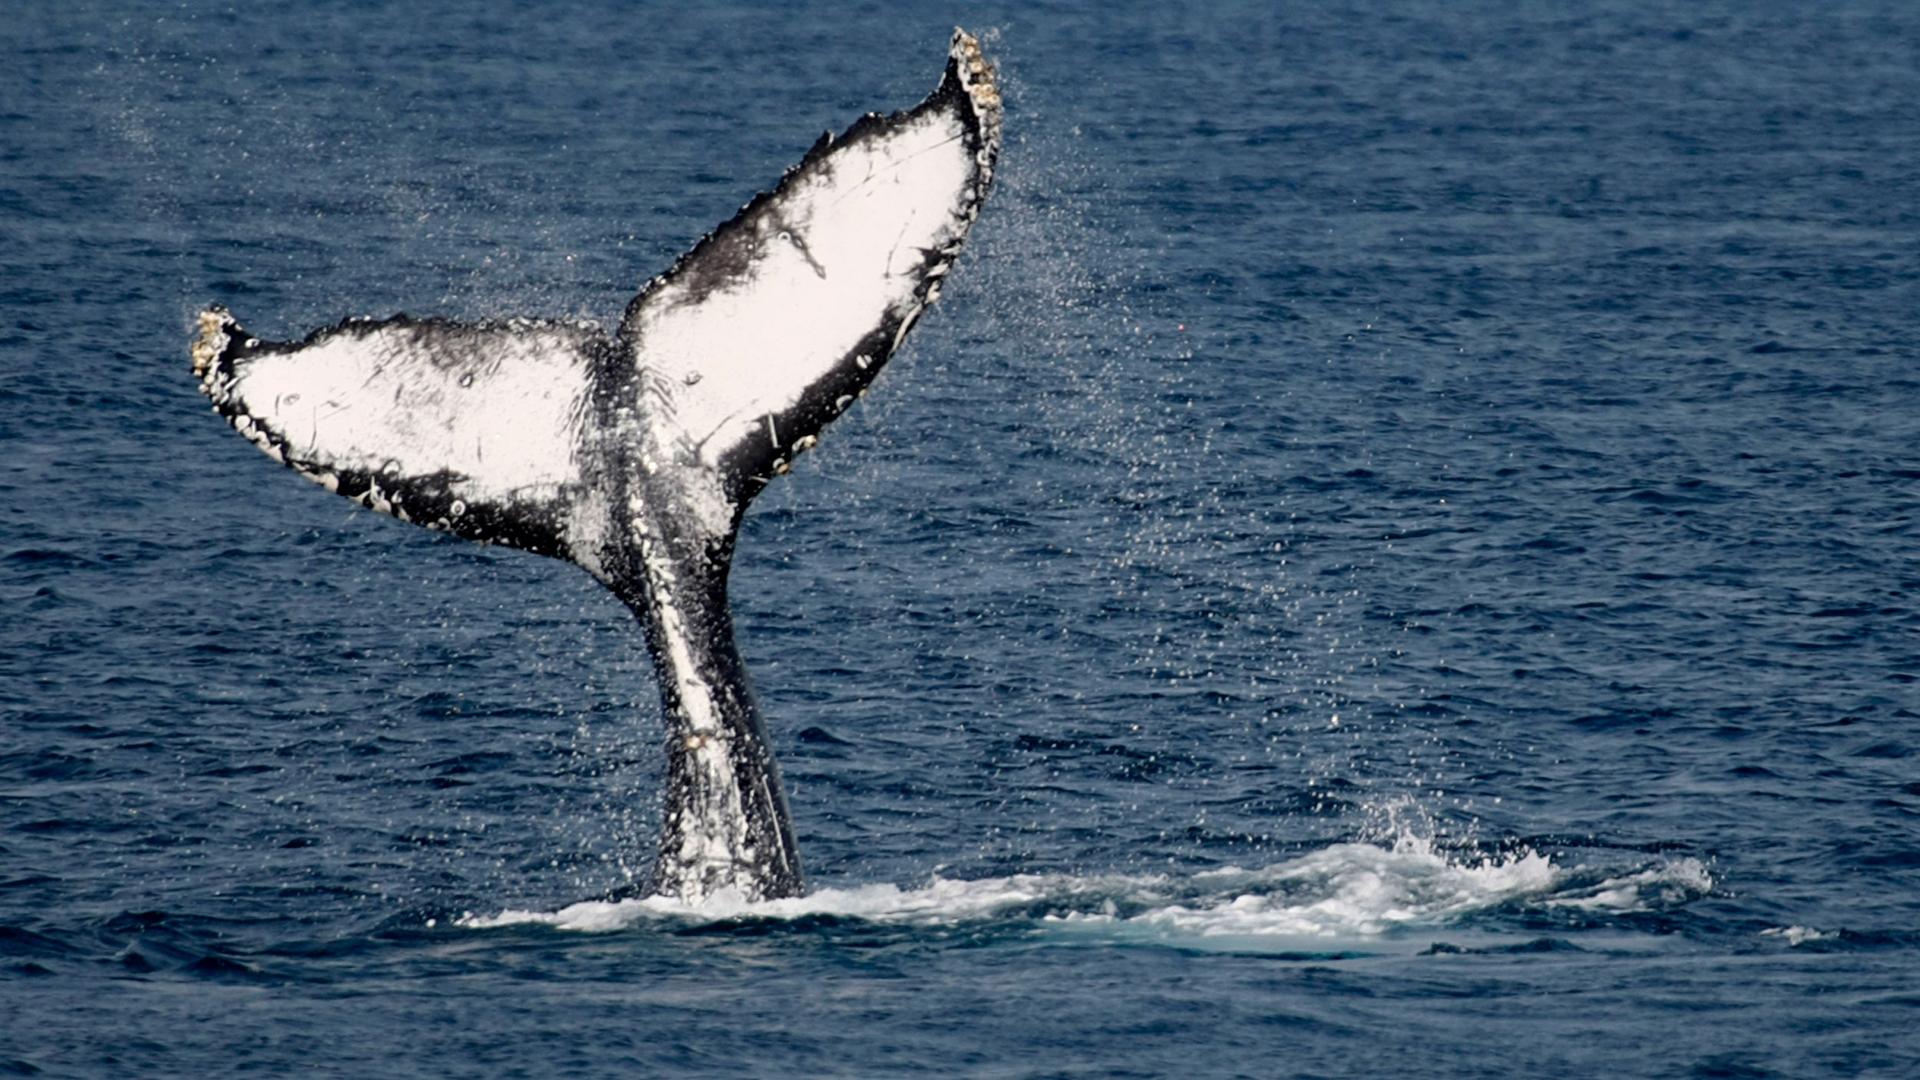 The tale of a humpback whale is shown rising out of the ocean and slapping on the surface of the water near Okinawa, Japan.